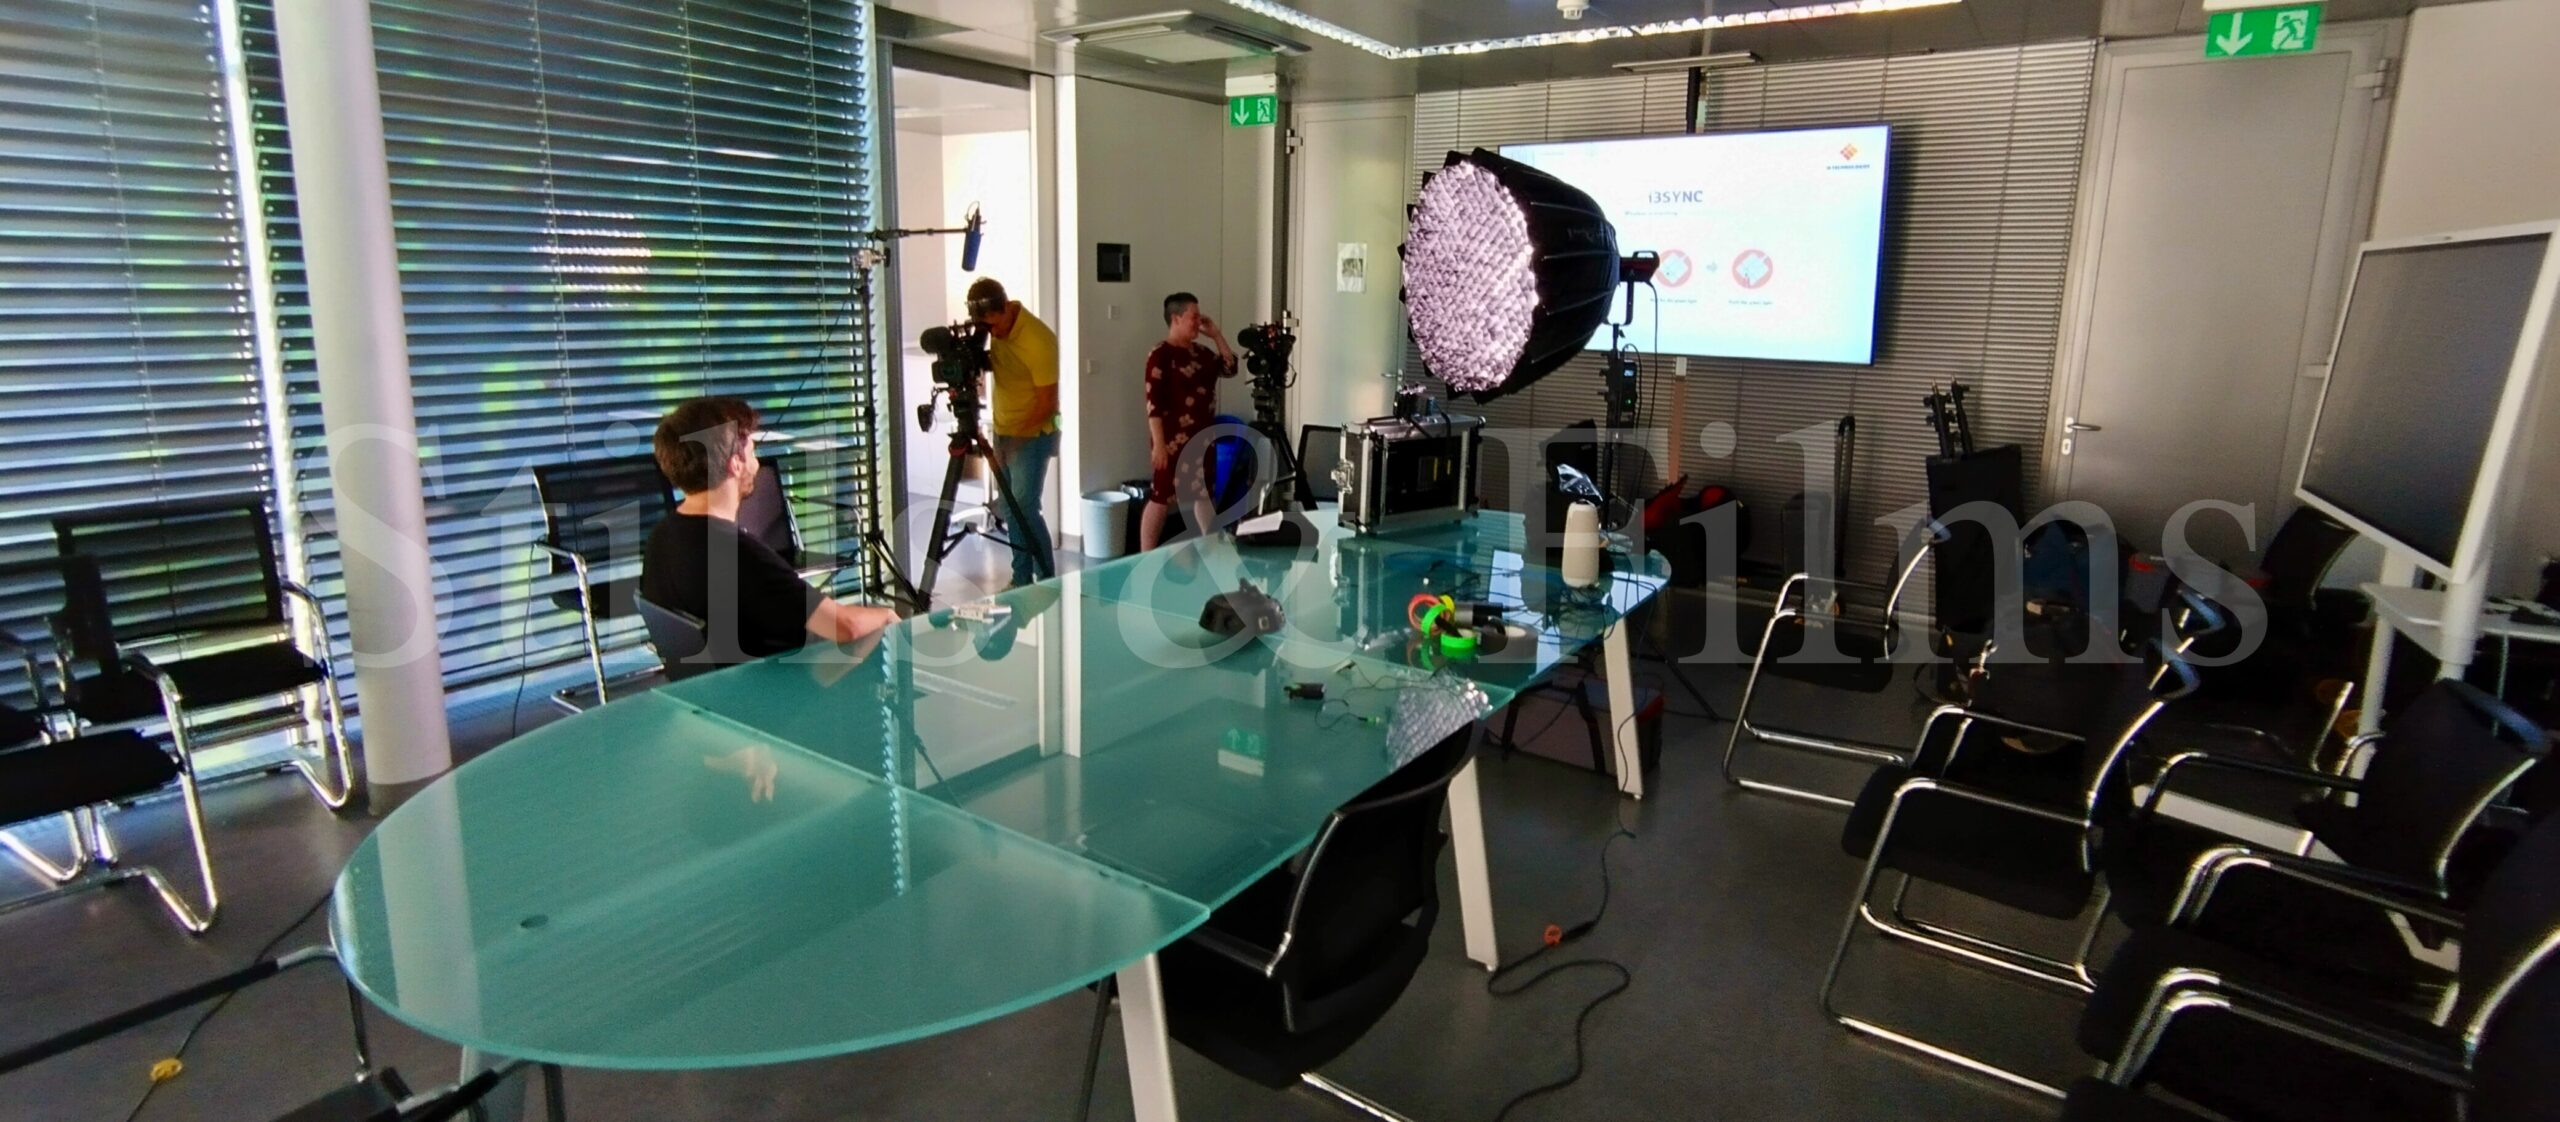 Remote video production via Zoom from the Gregor Mendel Institute in Vienna, Austria